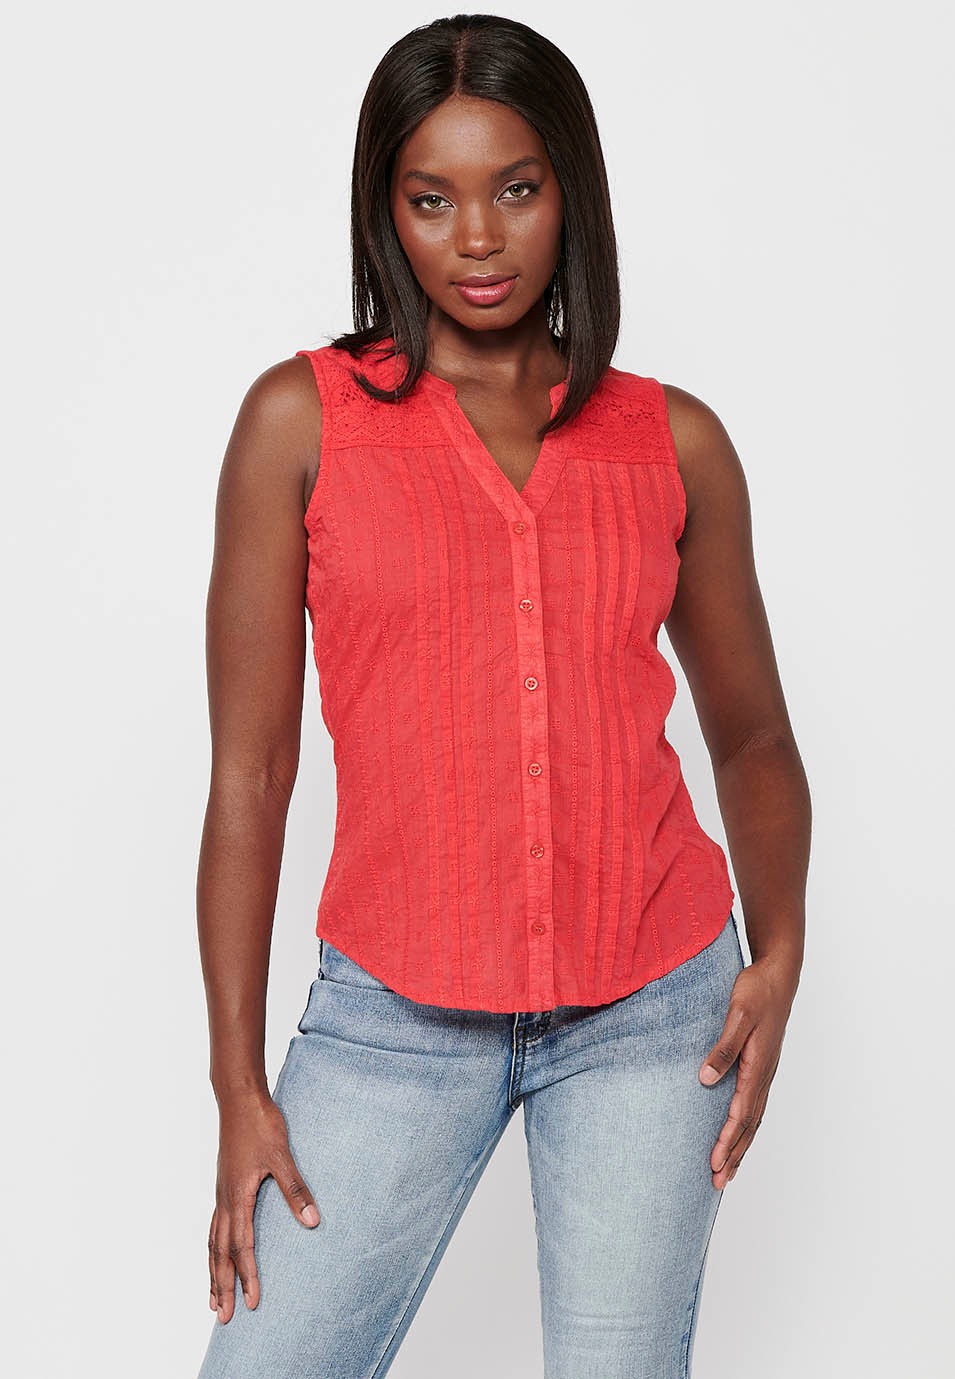 Embroidered Fabric Sleeveless Blouse with V-Neckline and Front Closure with Coral Color Buttons for Women